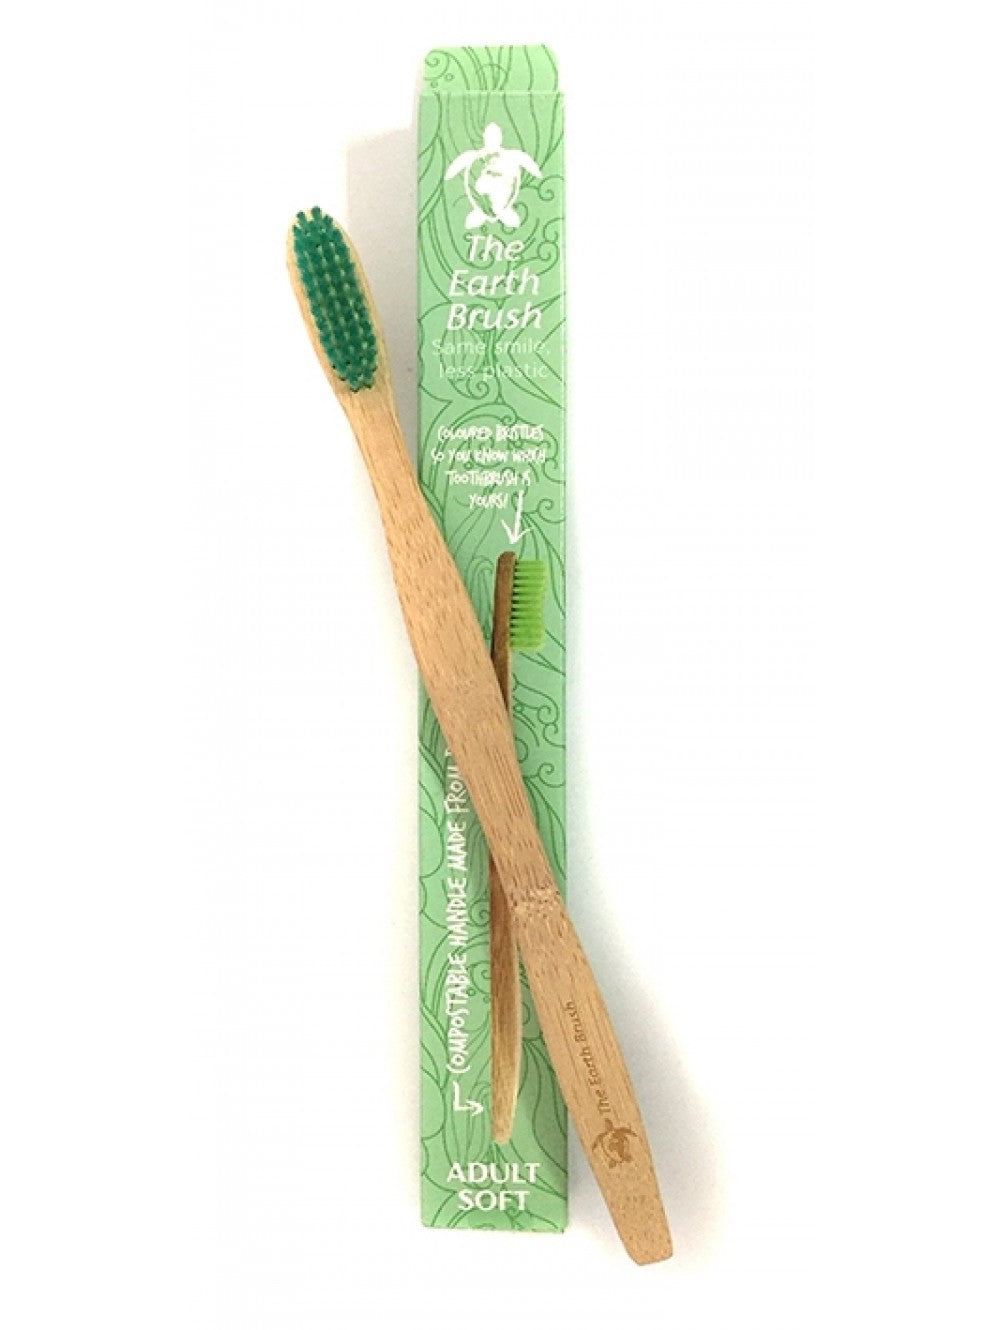 Earth Brush - Biodegradable Adult Toothbrush - Soft